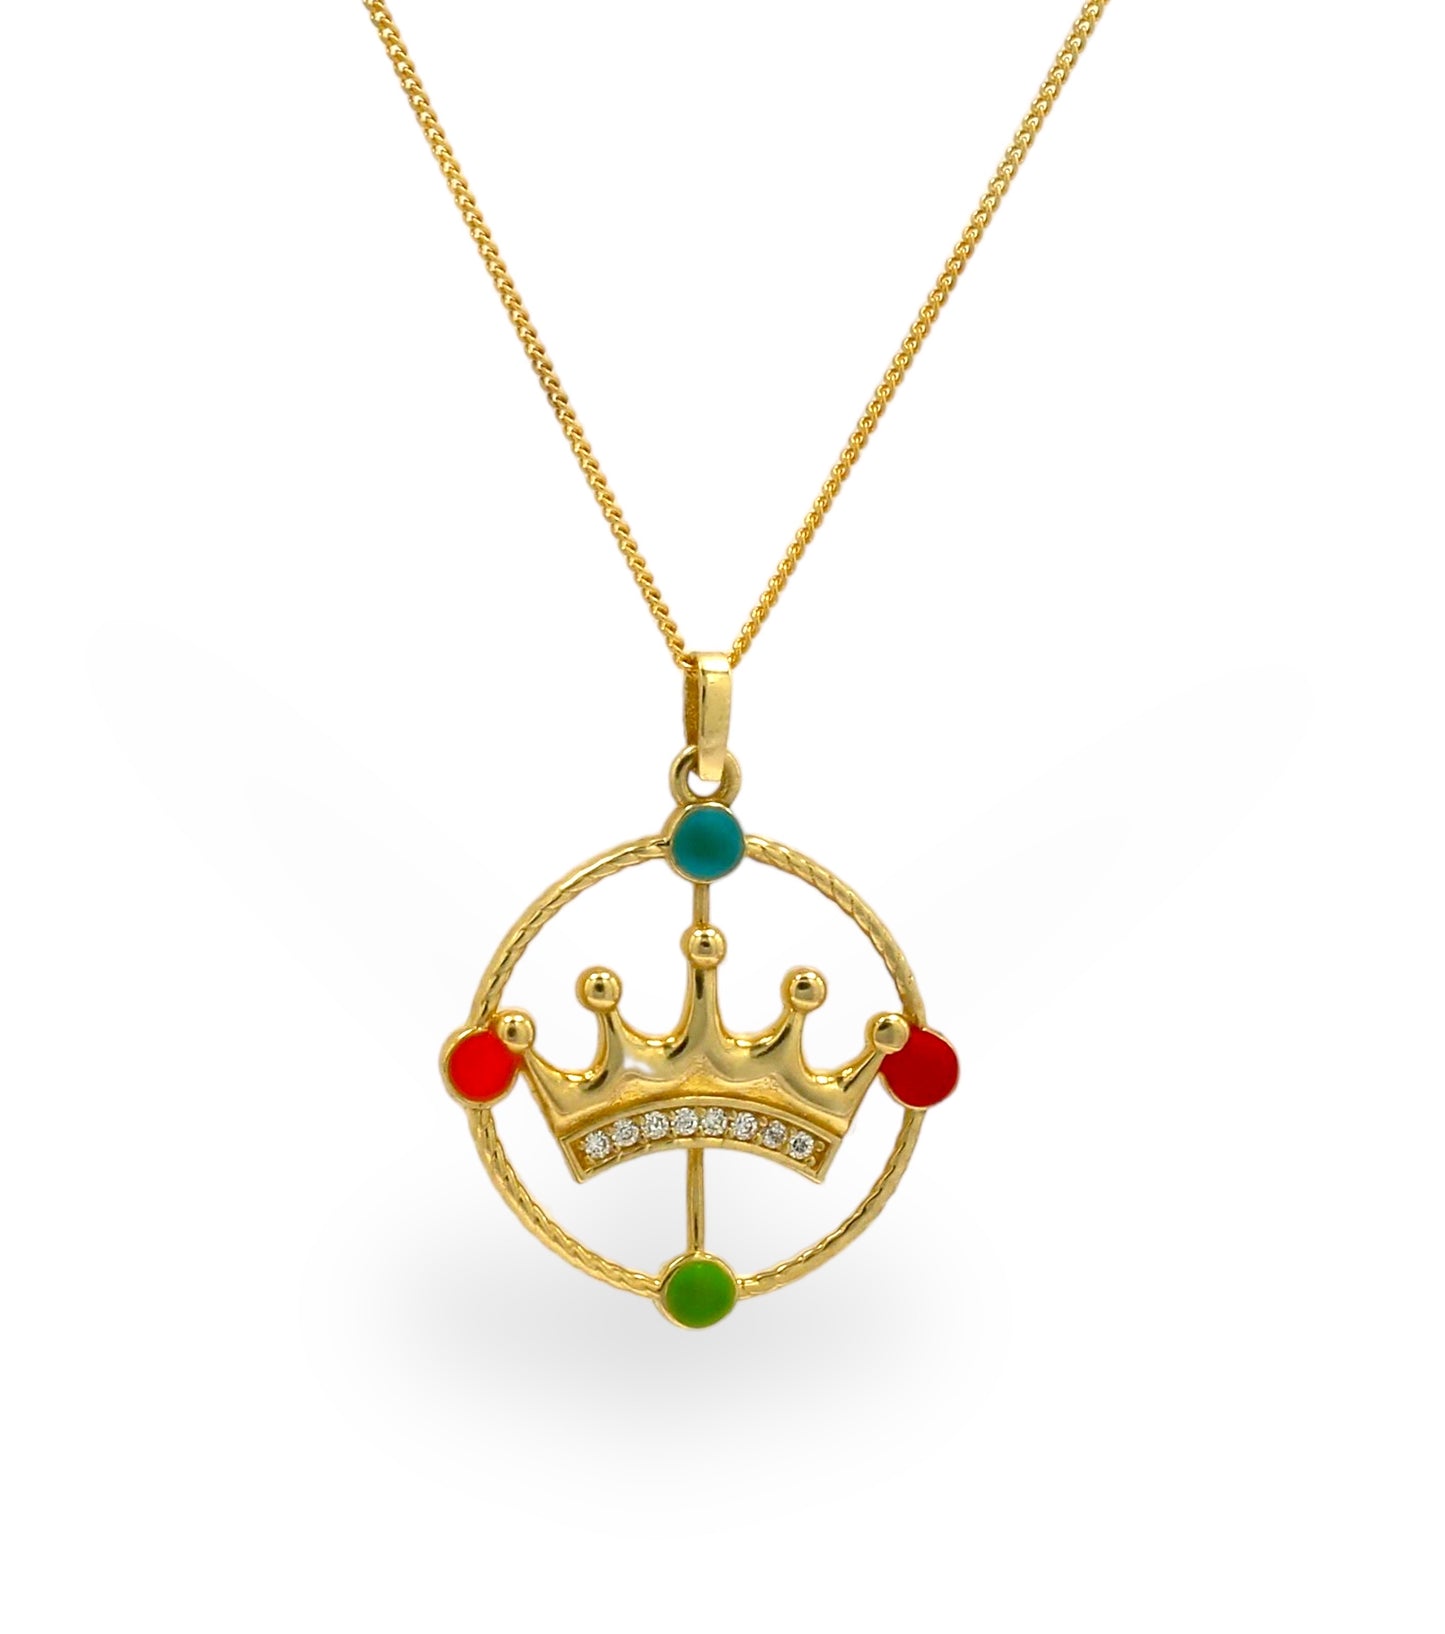 10k Yellow gold crown pendant necklace-01